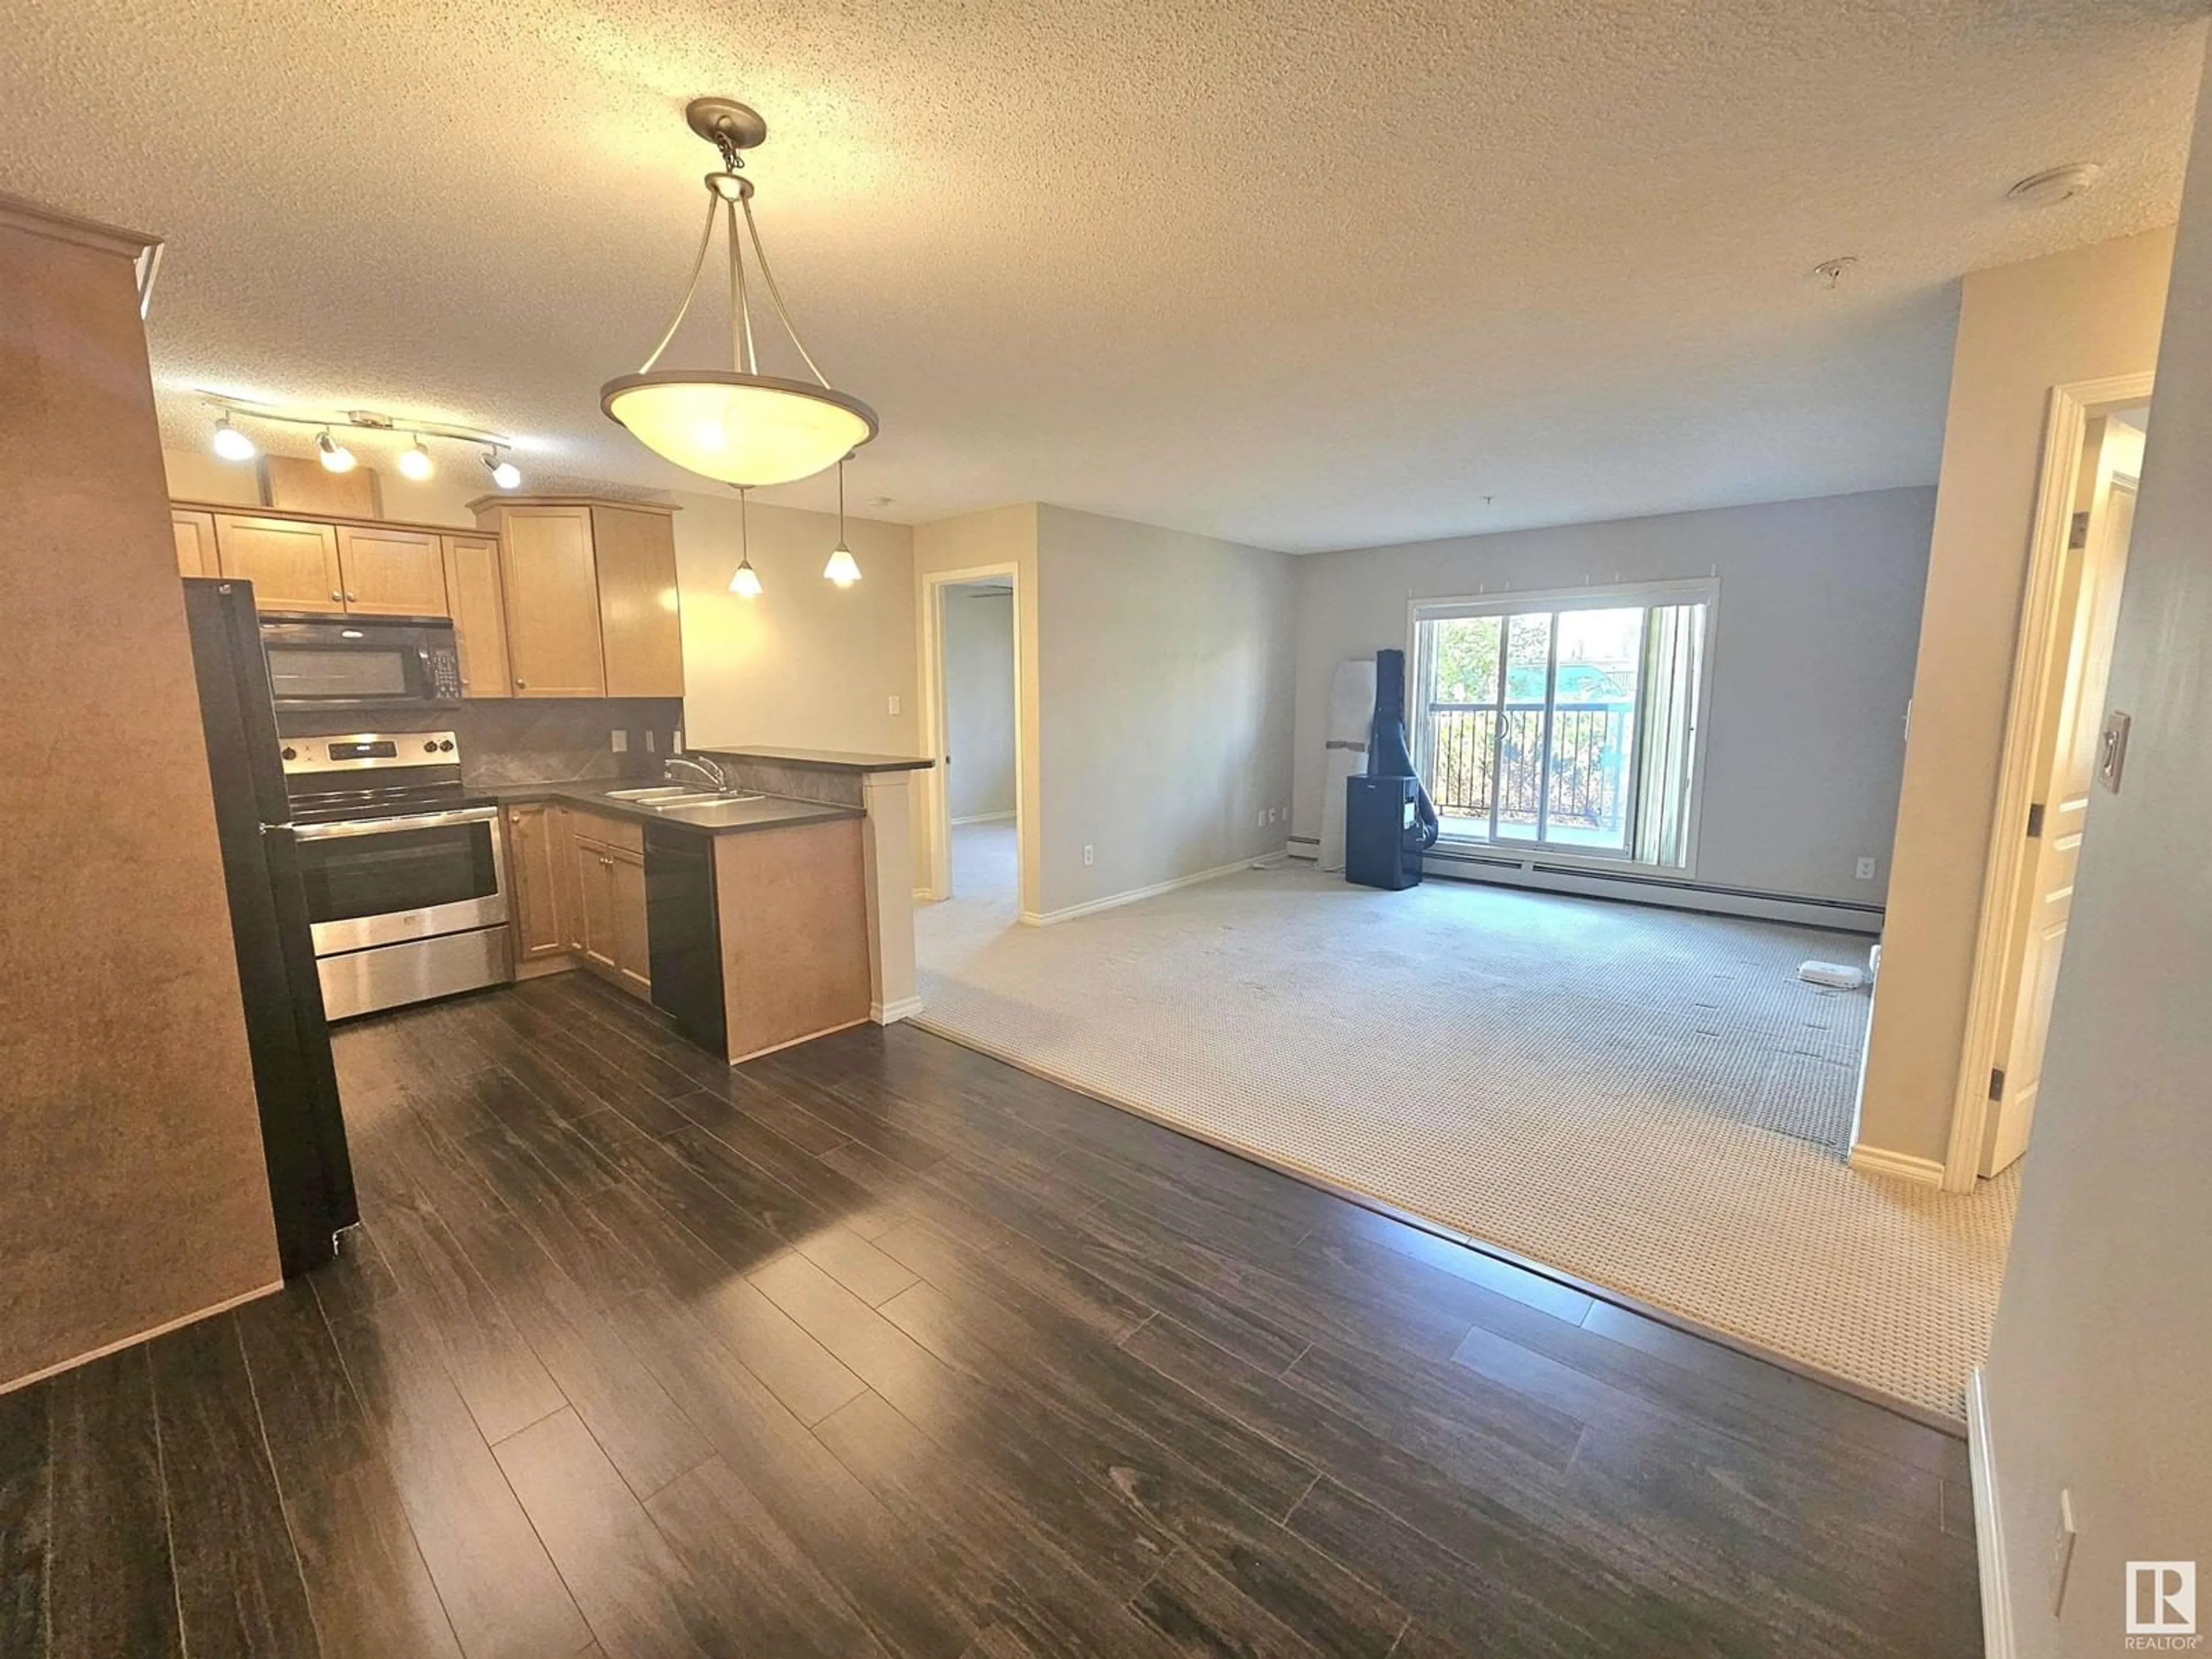 A pic of a room for #141 2436 GUARDIAN RD NW, Edmonton Alberta T5T2P5